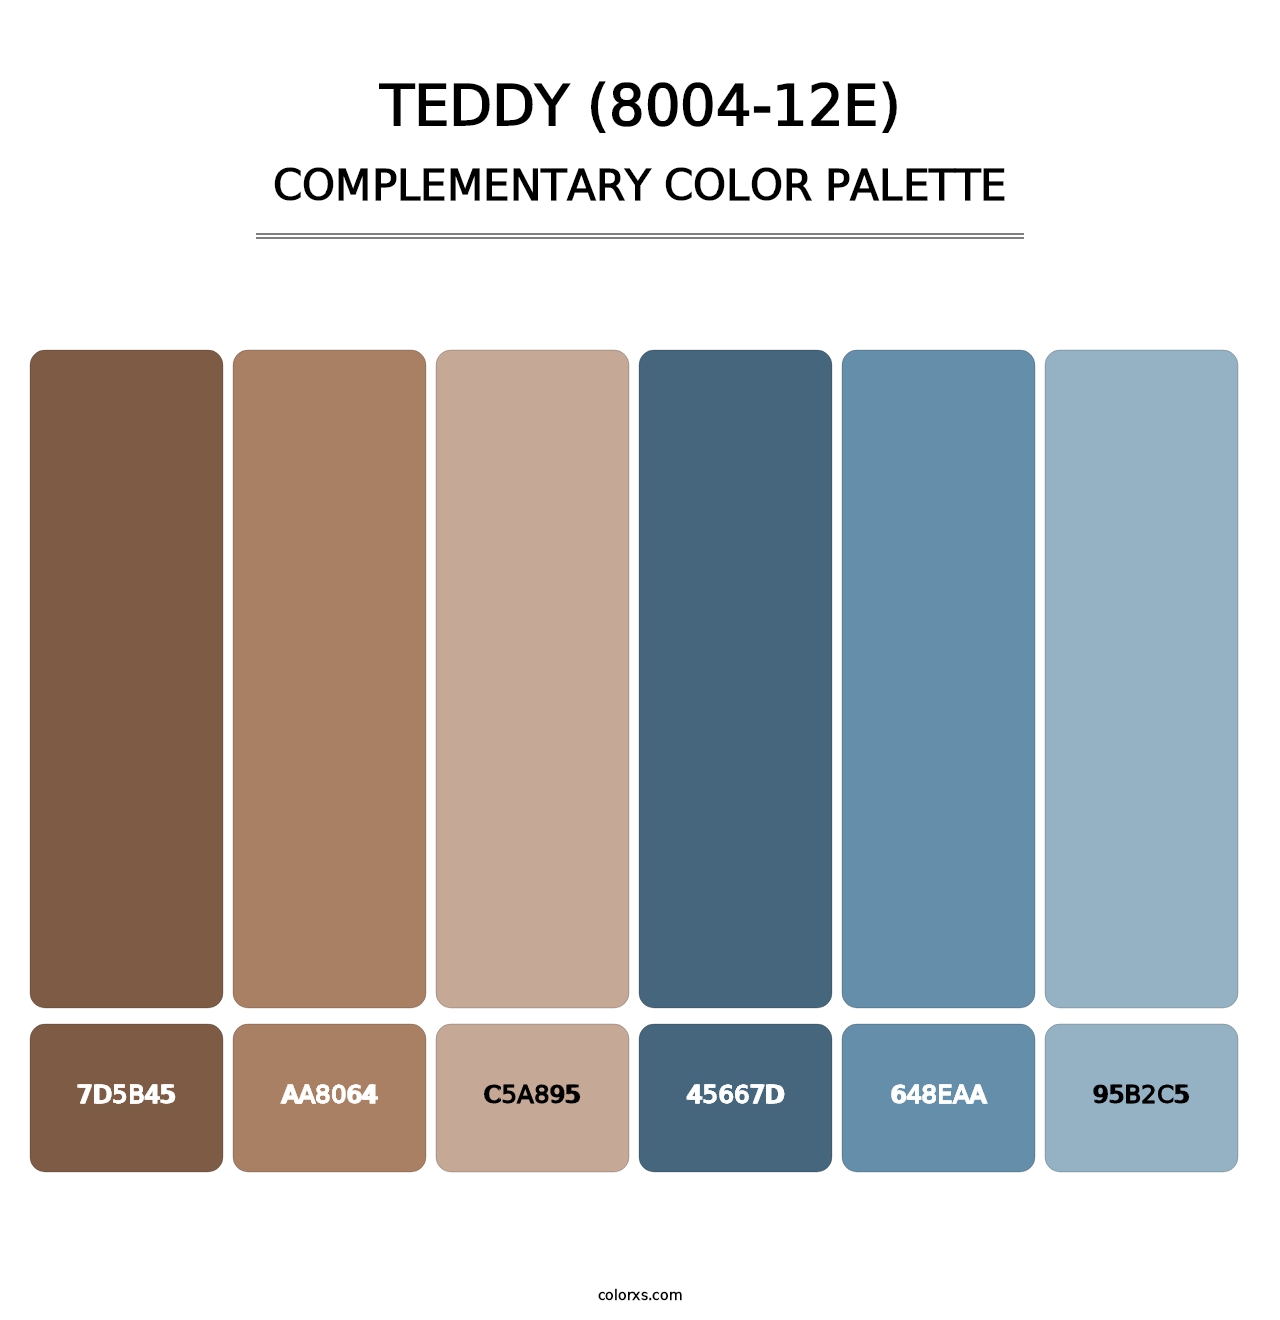 Teddy (8004-12E) - Complementary Color Palette